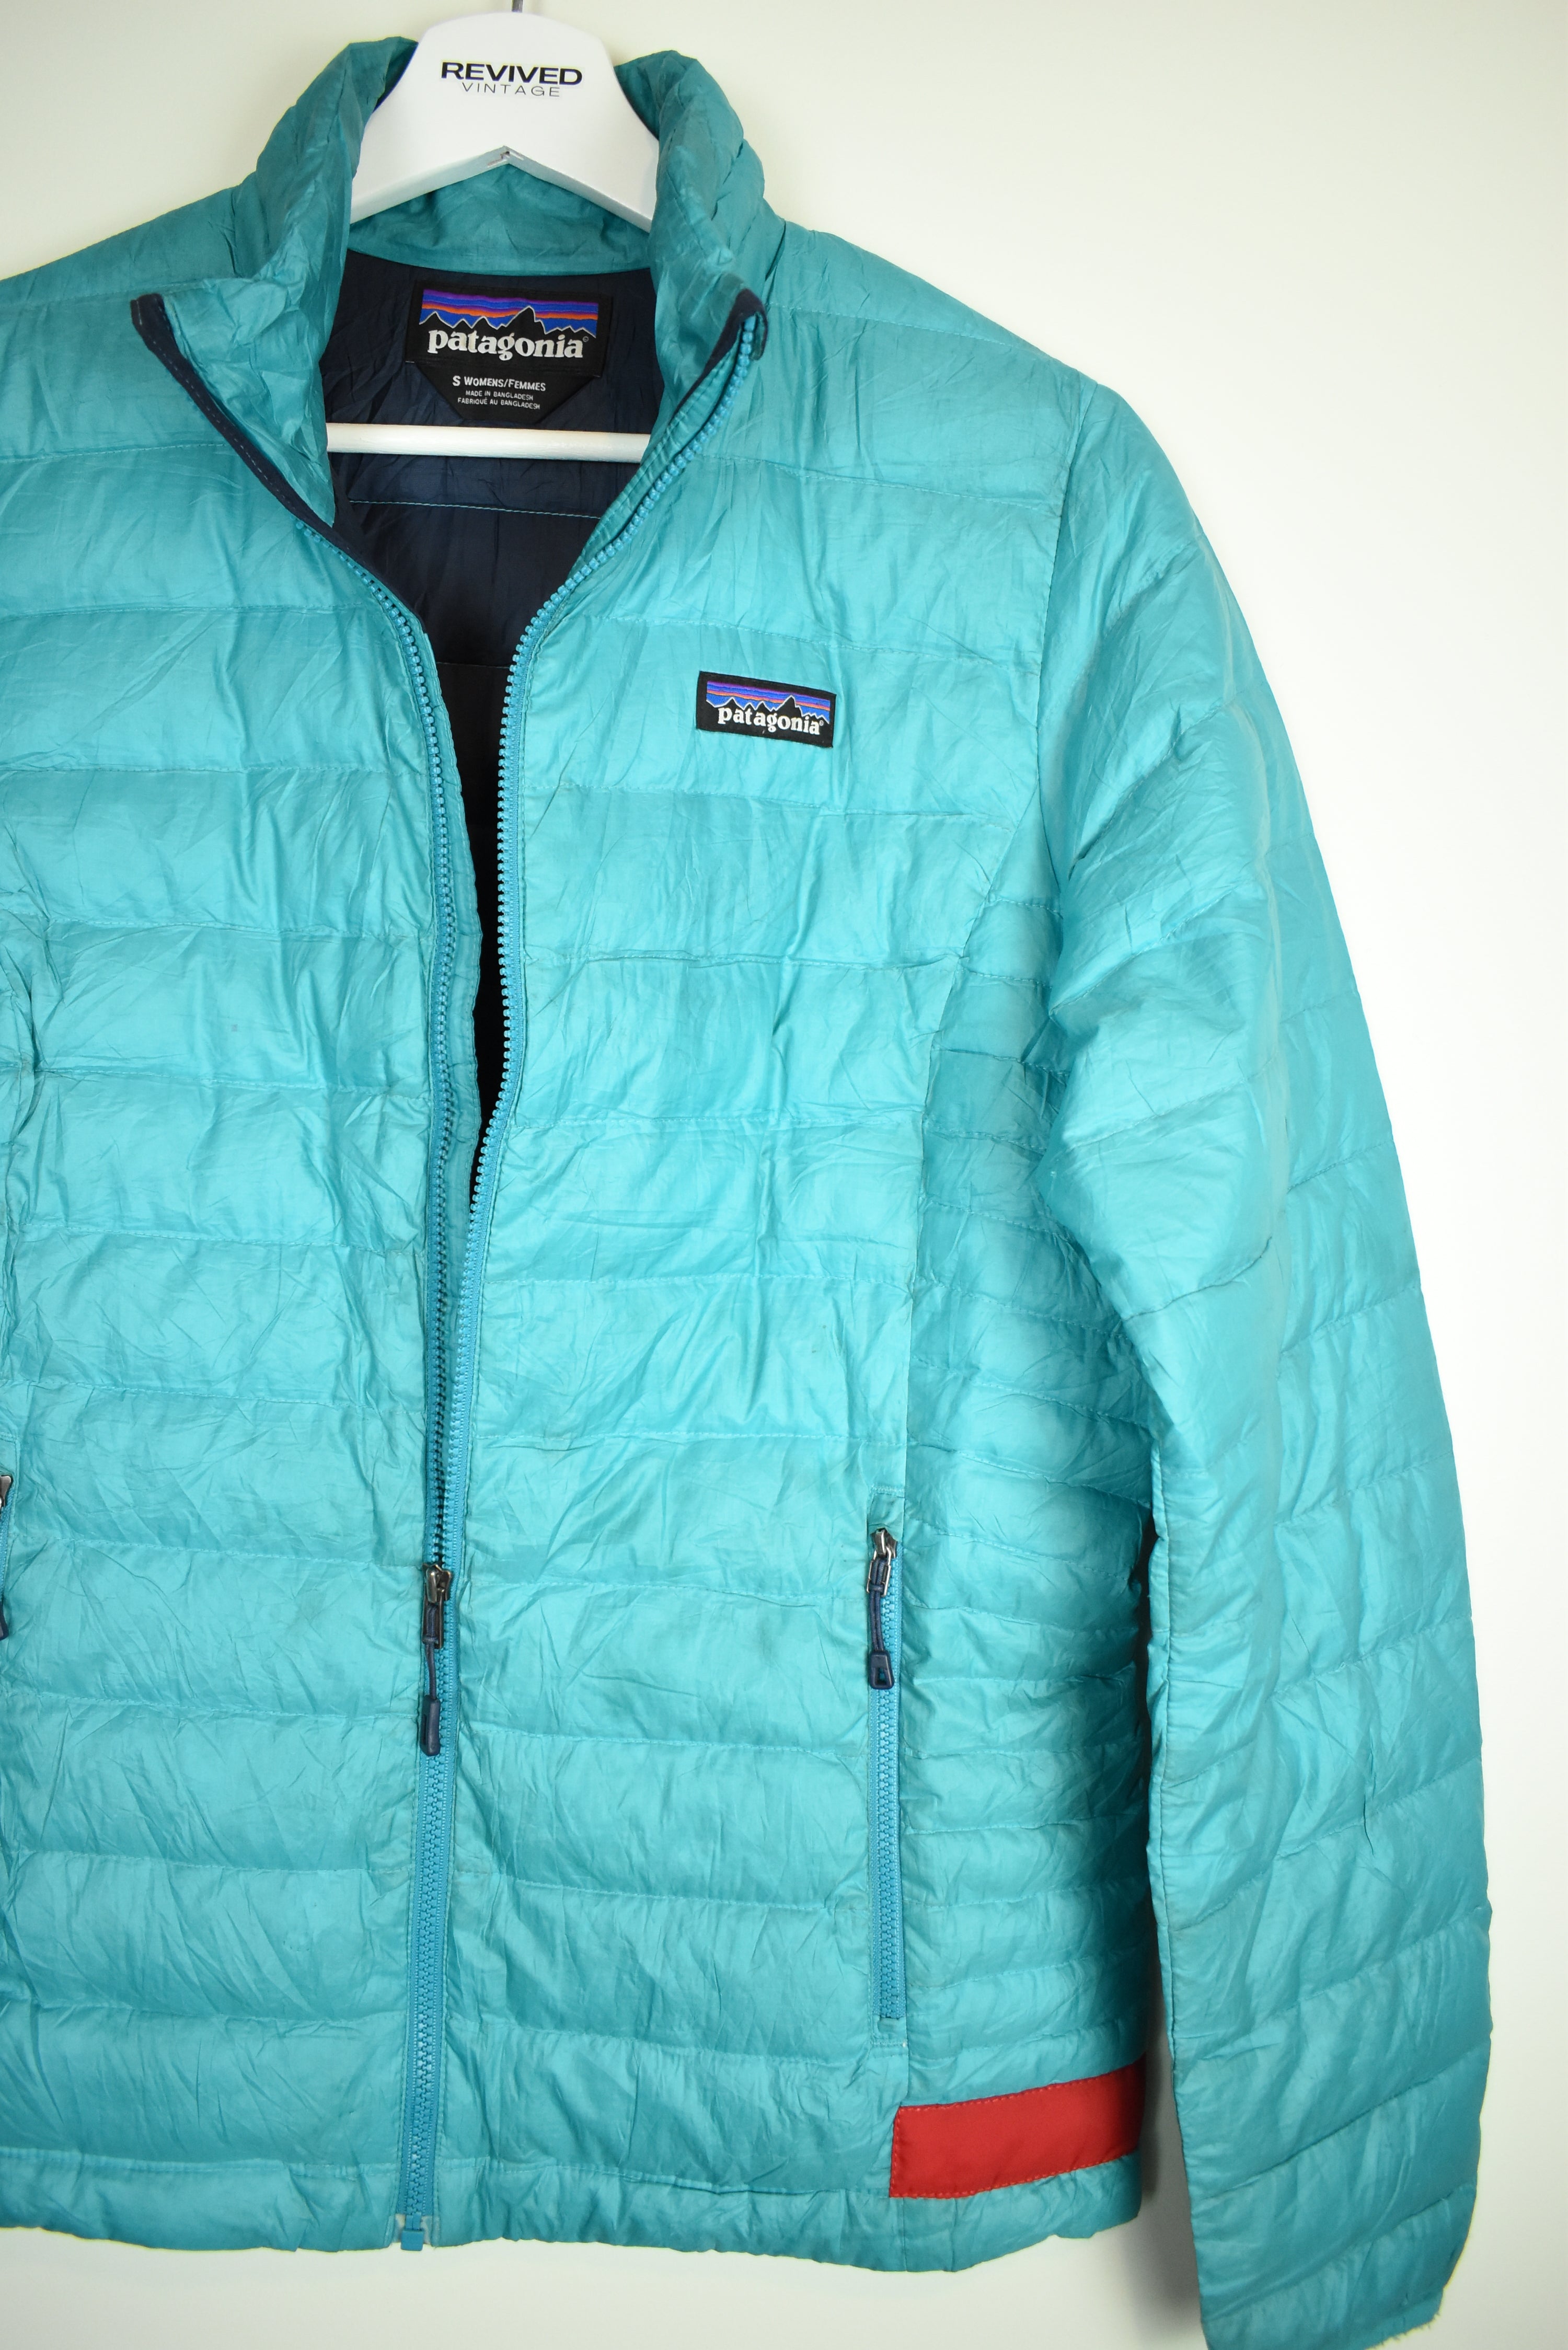 Vintage Patagonia Turquoise Puffer Jacket Small